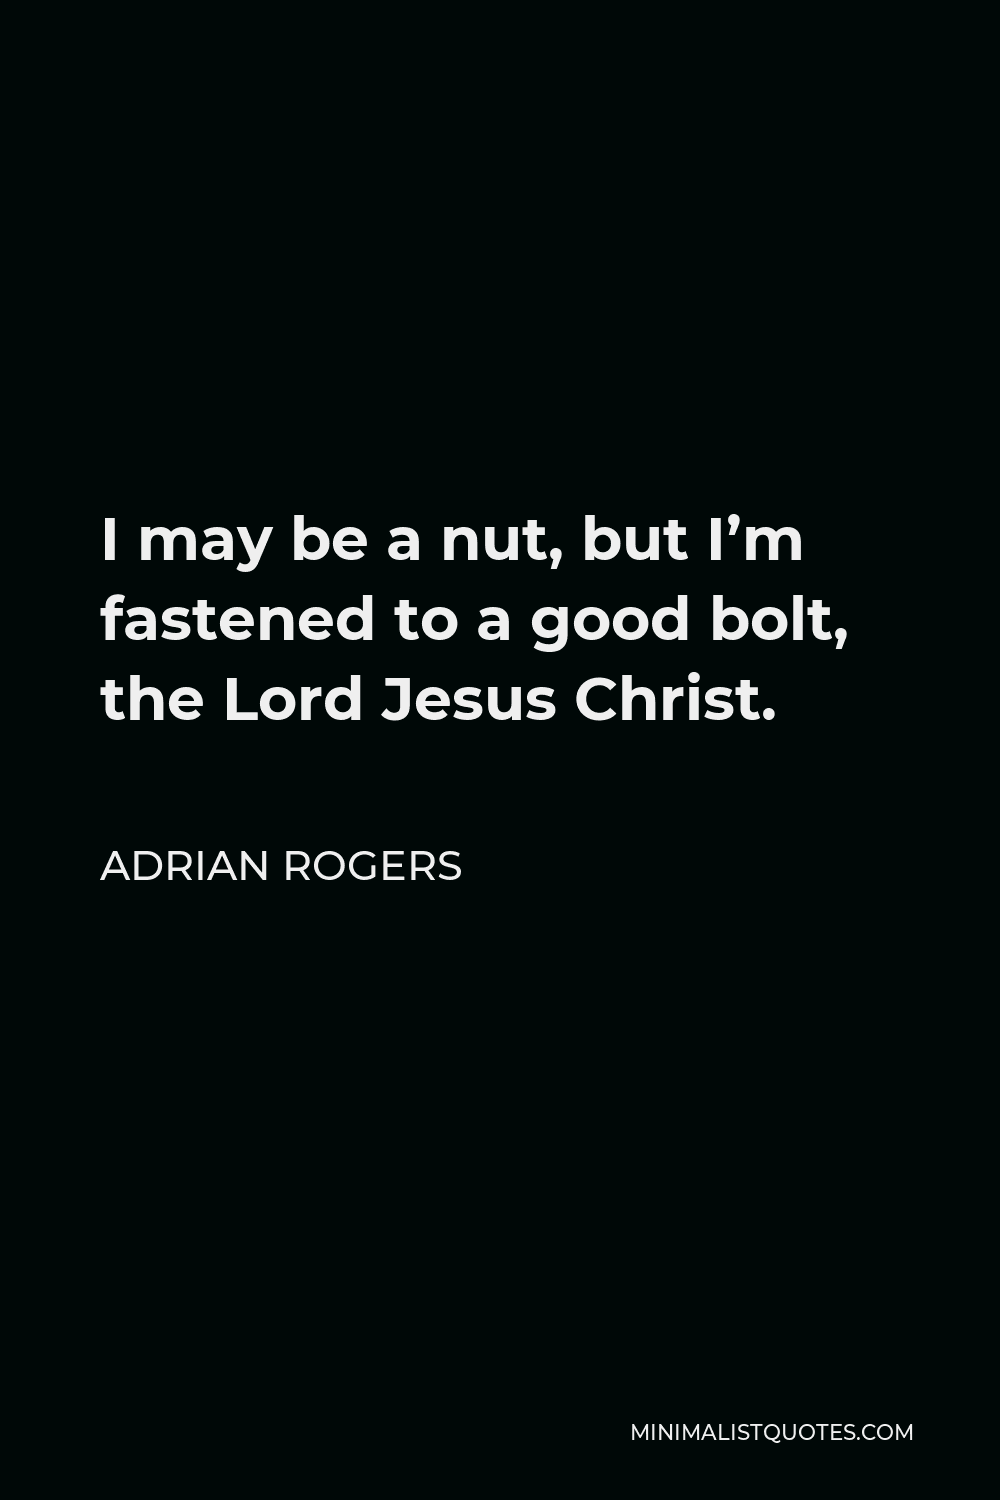 Adrian Rogers Quote - I may be a nut, but I’m fastened to a good bolt, the Lord Jesus Christ.